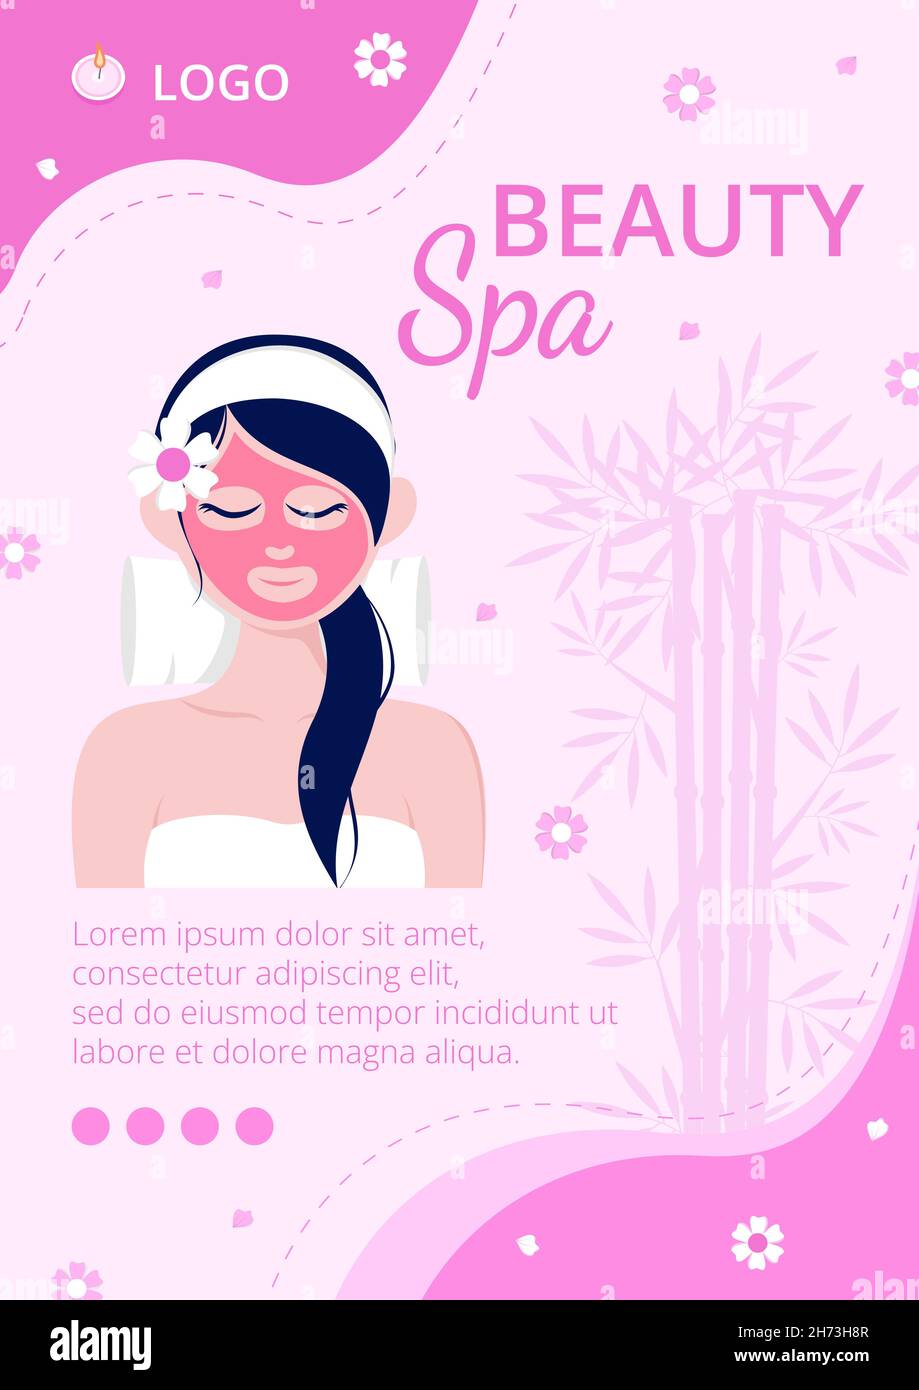 Beauty Spa and Yoga Flyer Editable of Square Background Suitable for Social Media, Feed, Card, Greetings, Print and Web Internet Ads Stock Vector